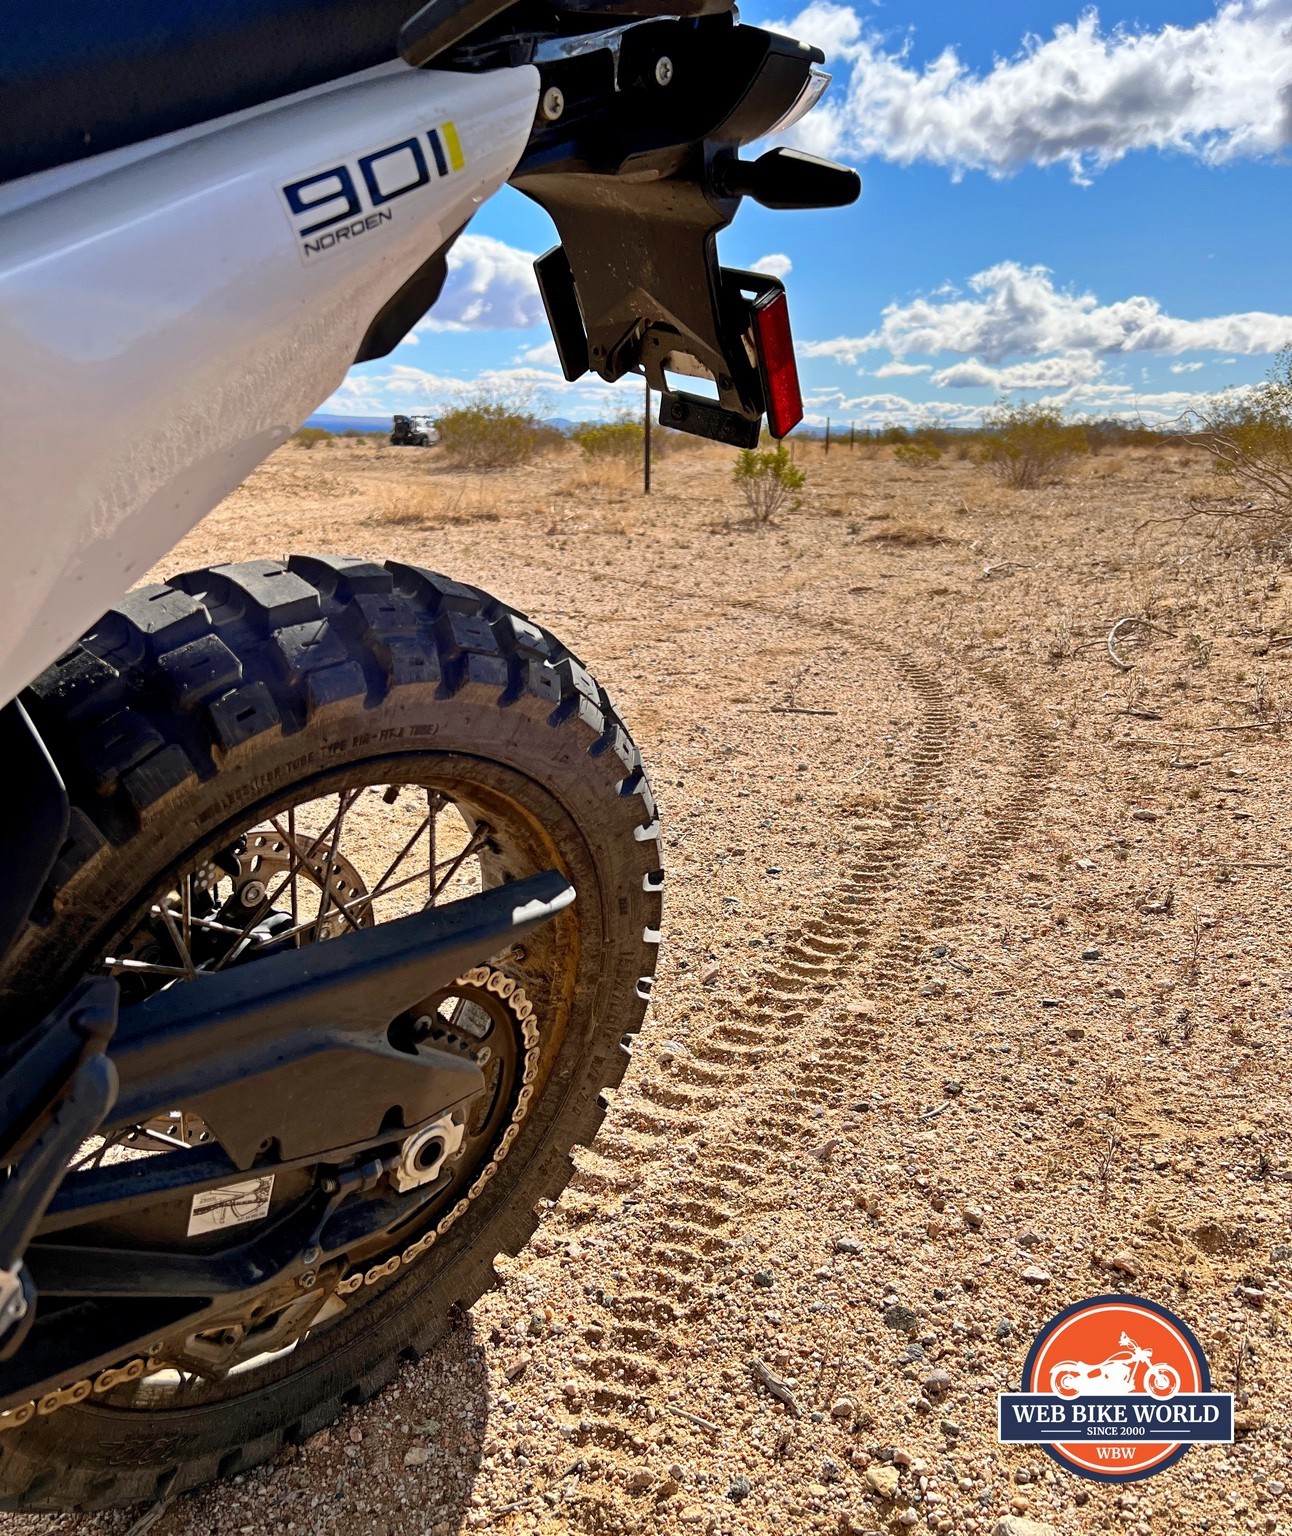 Even on hard-packed sand, the RallZ tires bite hard.